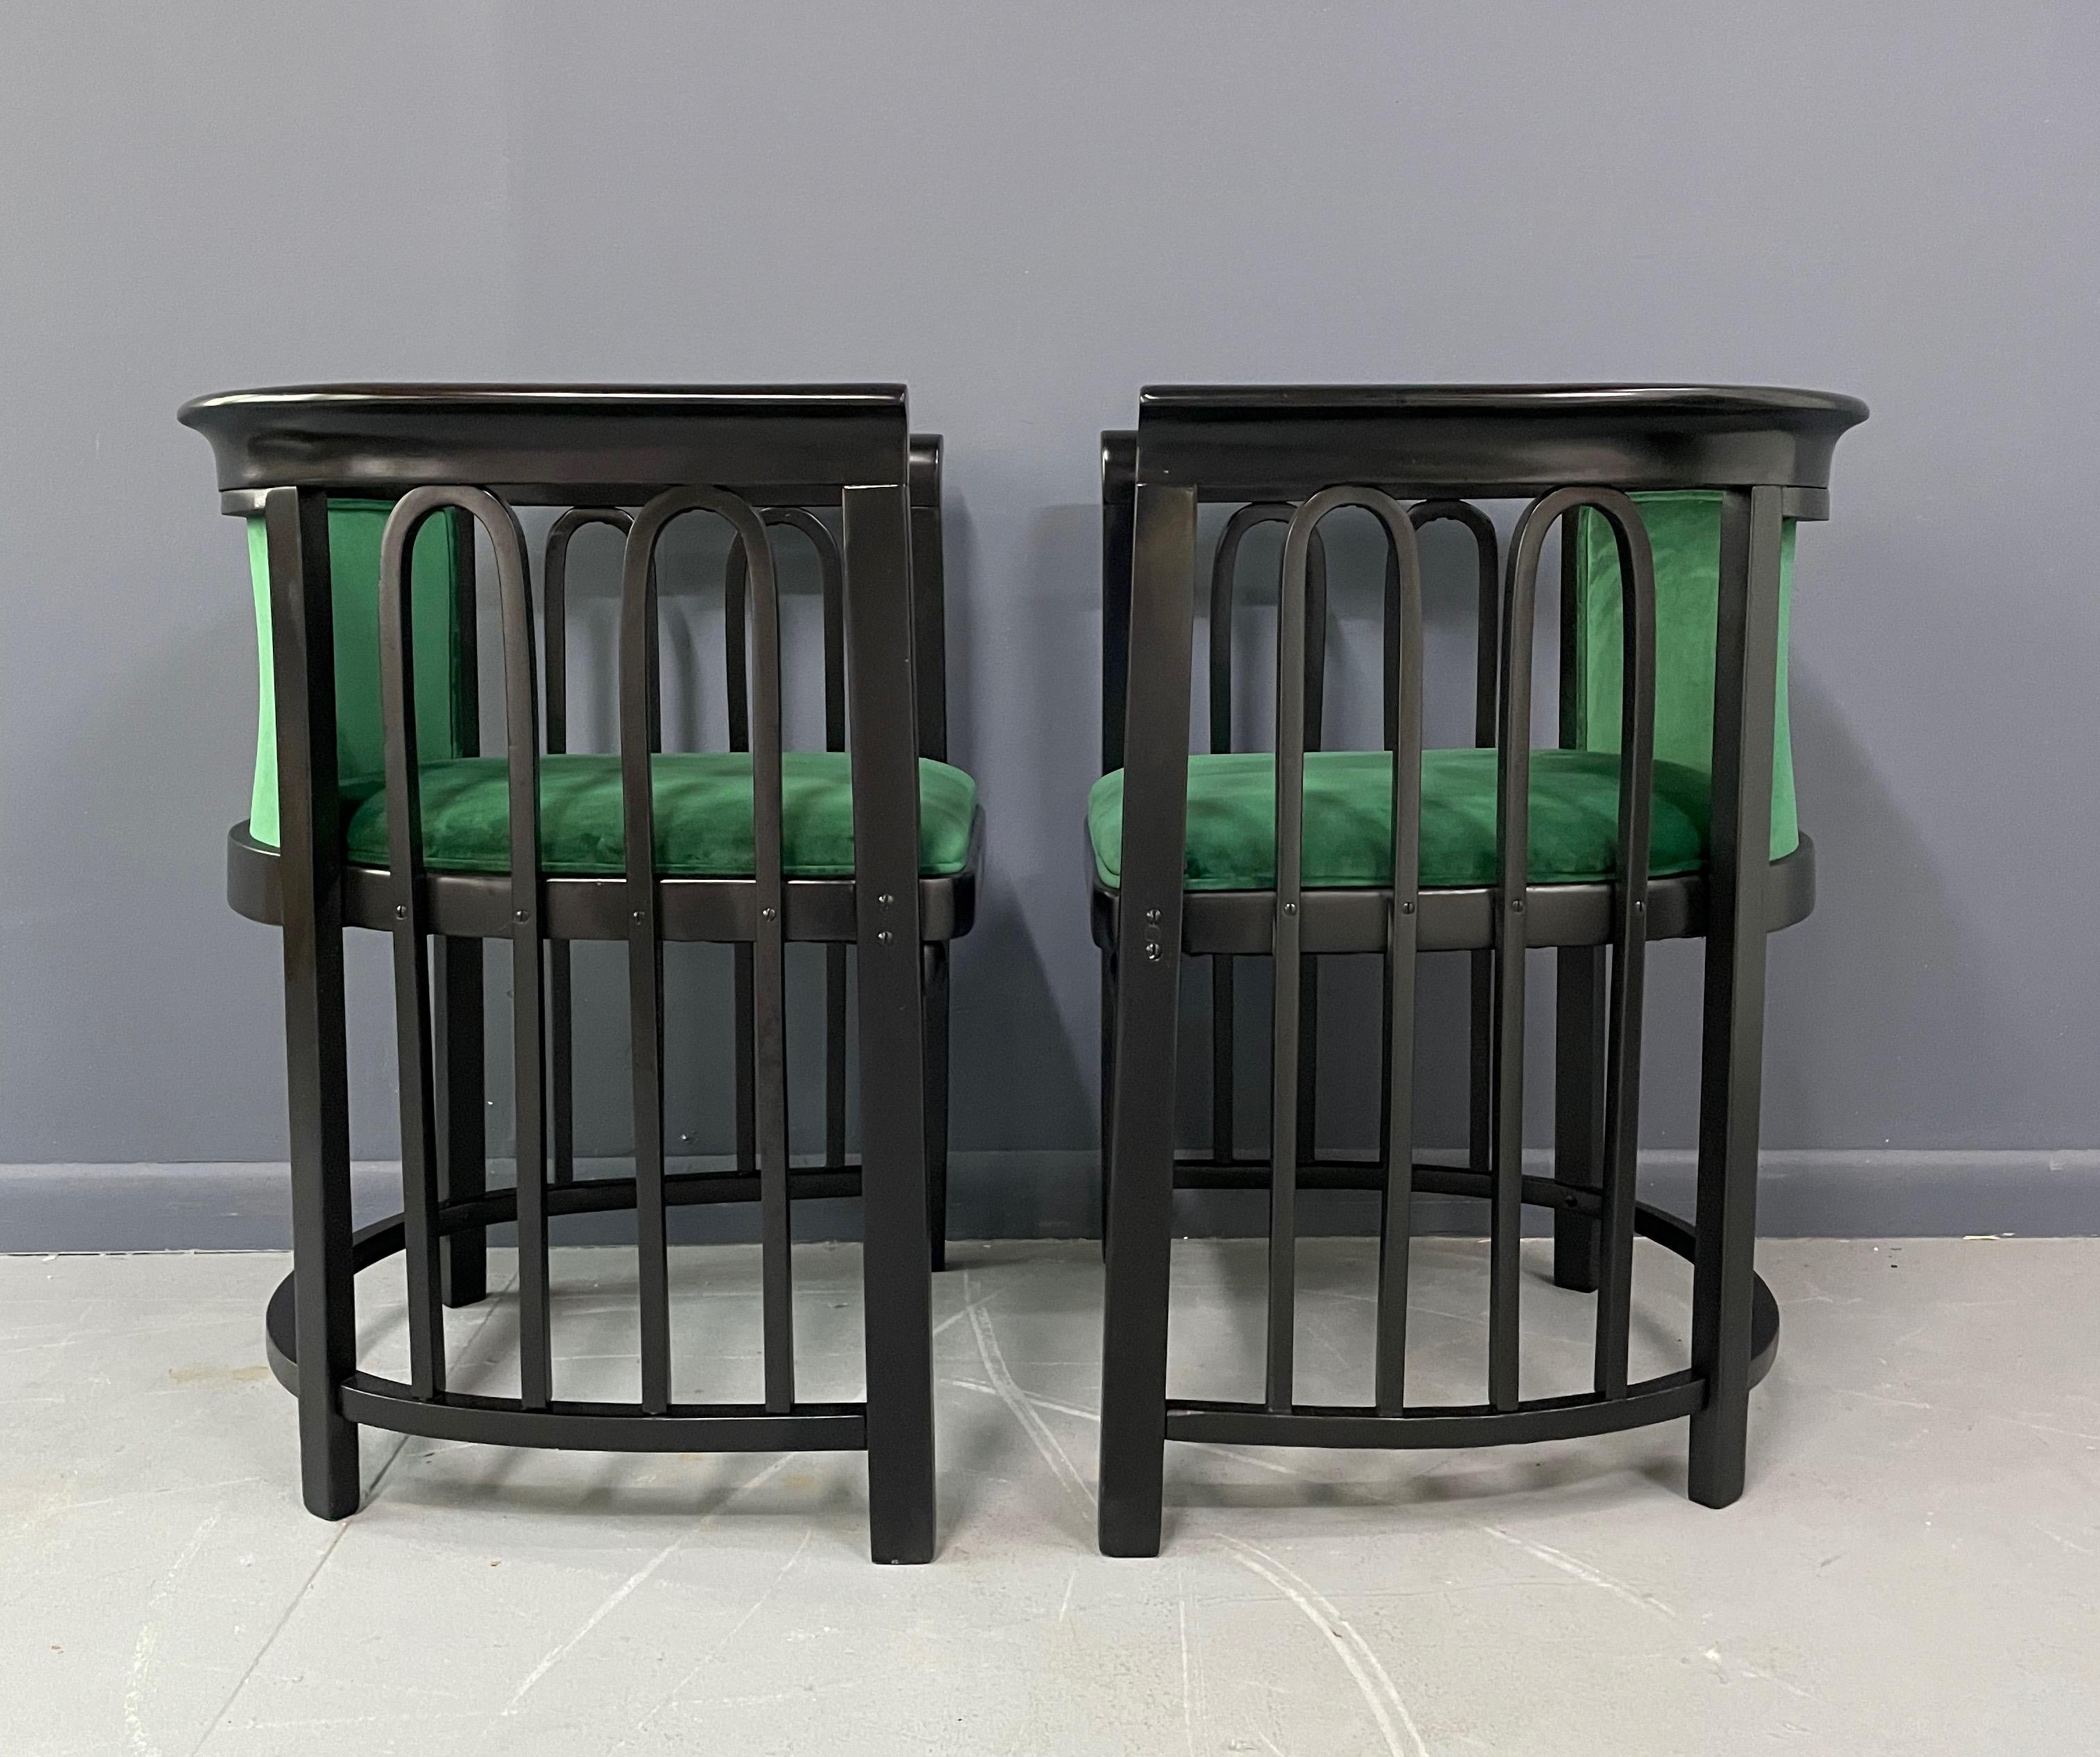 European Josef Hoffman Pair of Secessionist Bentwood Barrel Back Arm Chairs for J&J Kohn For Sale